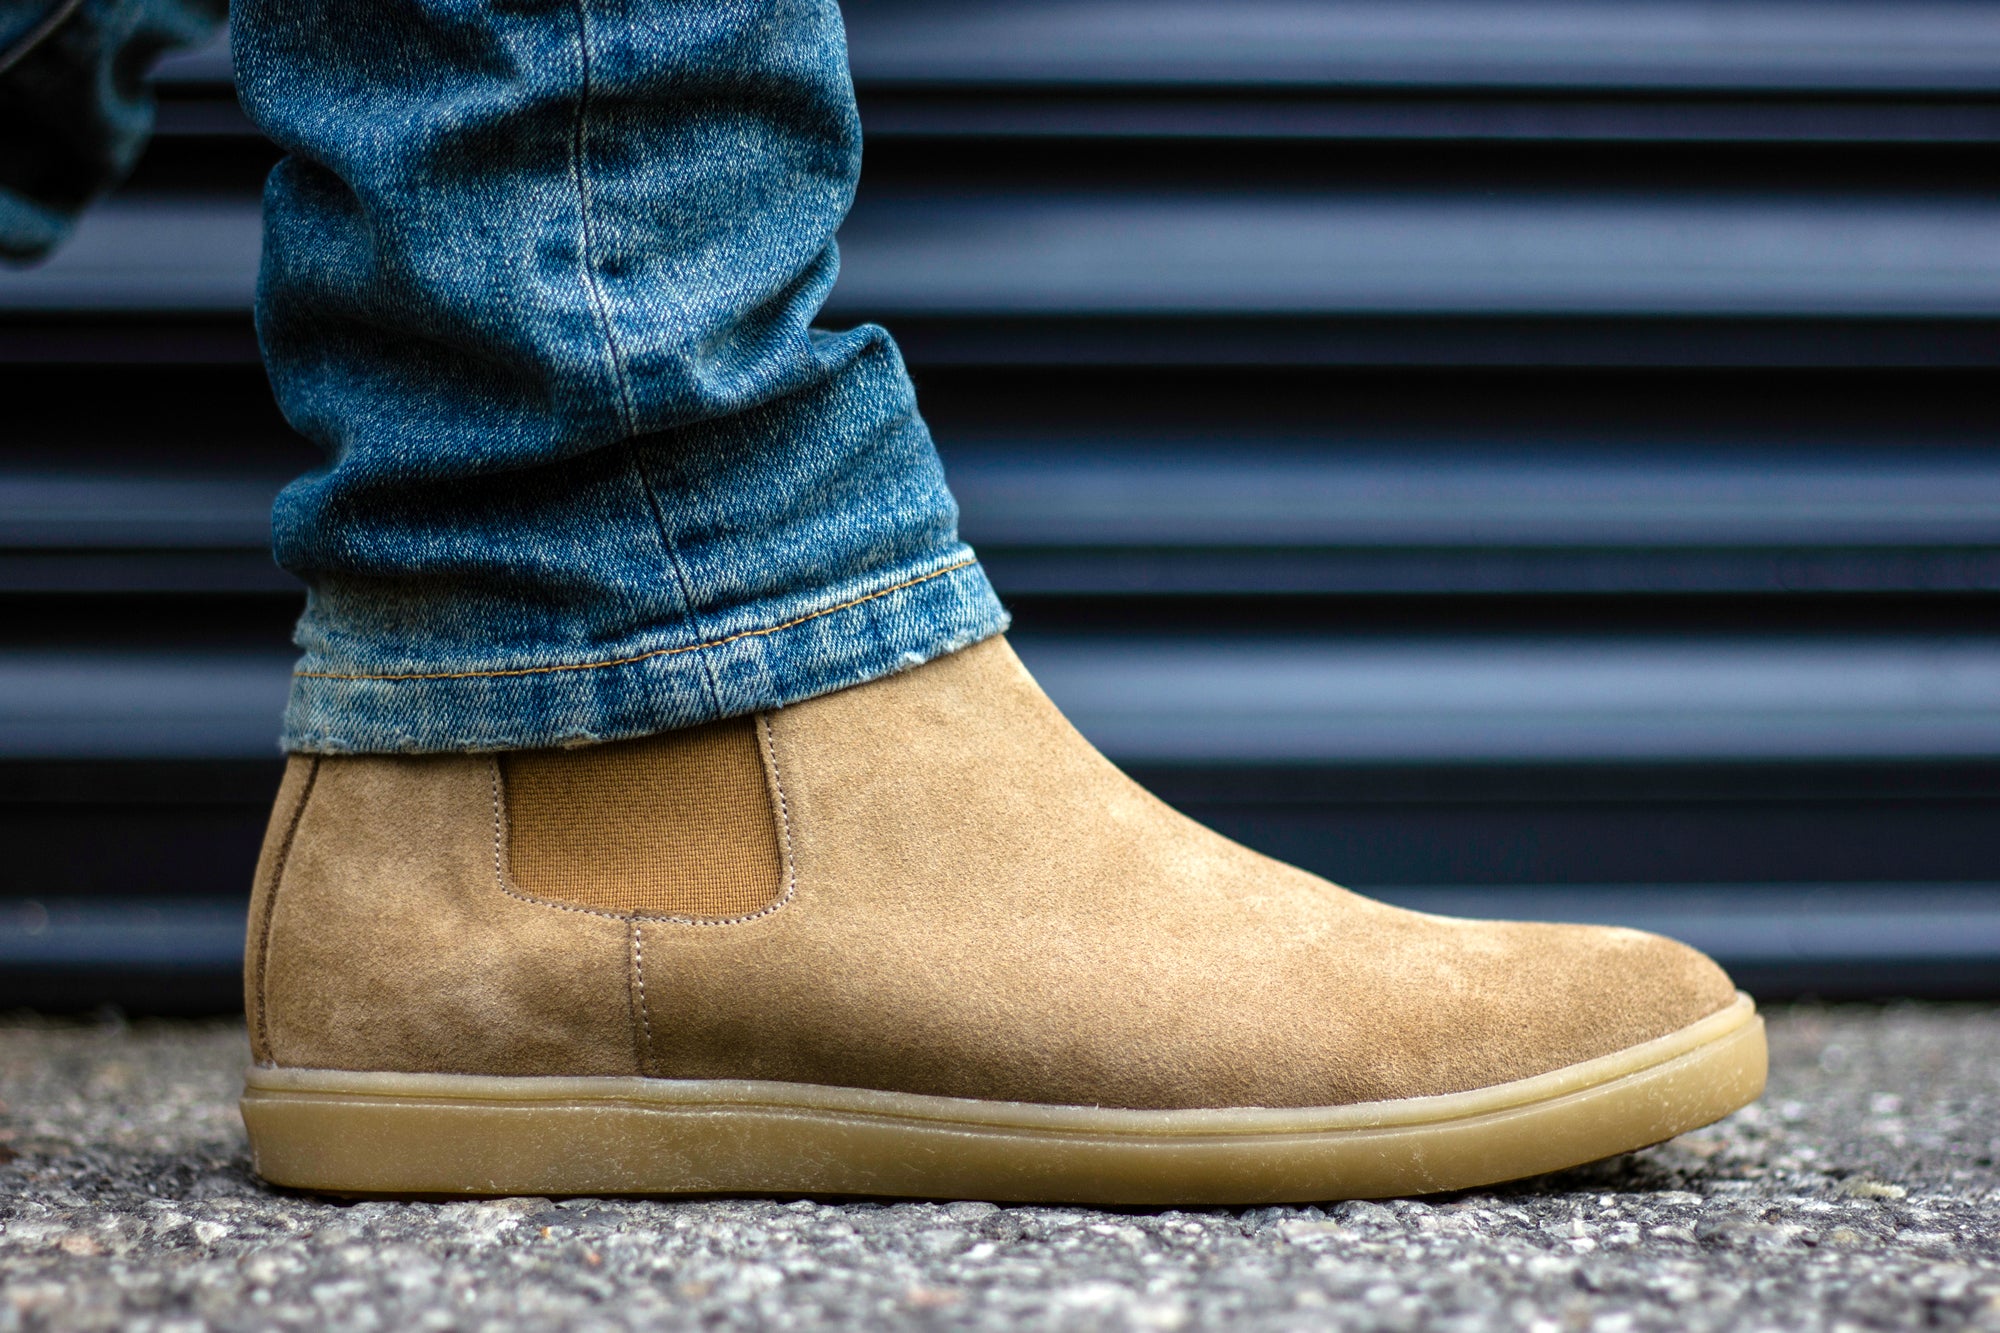 The Ultimate Chelsea Boot Sneaker